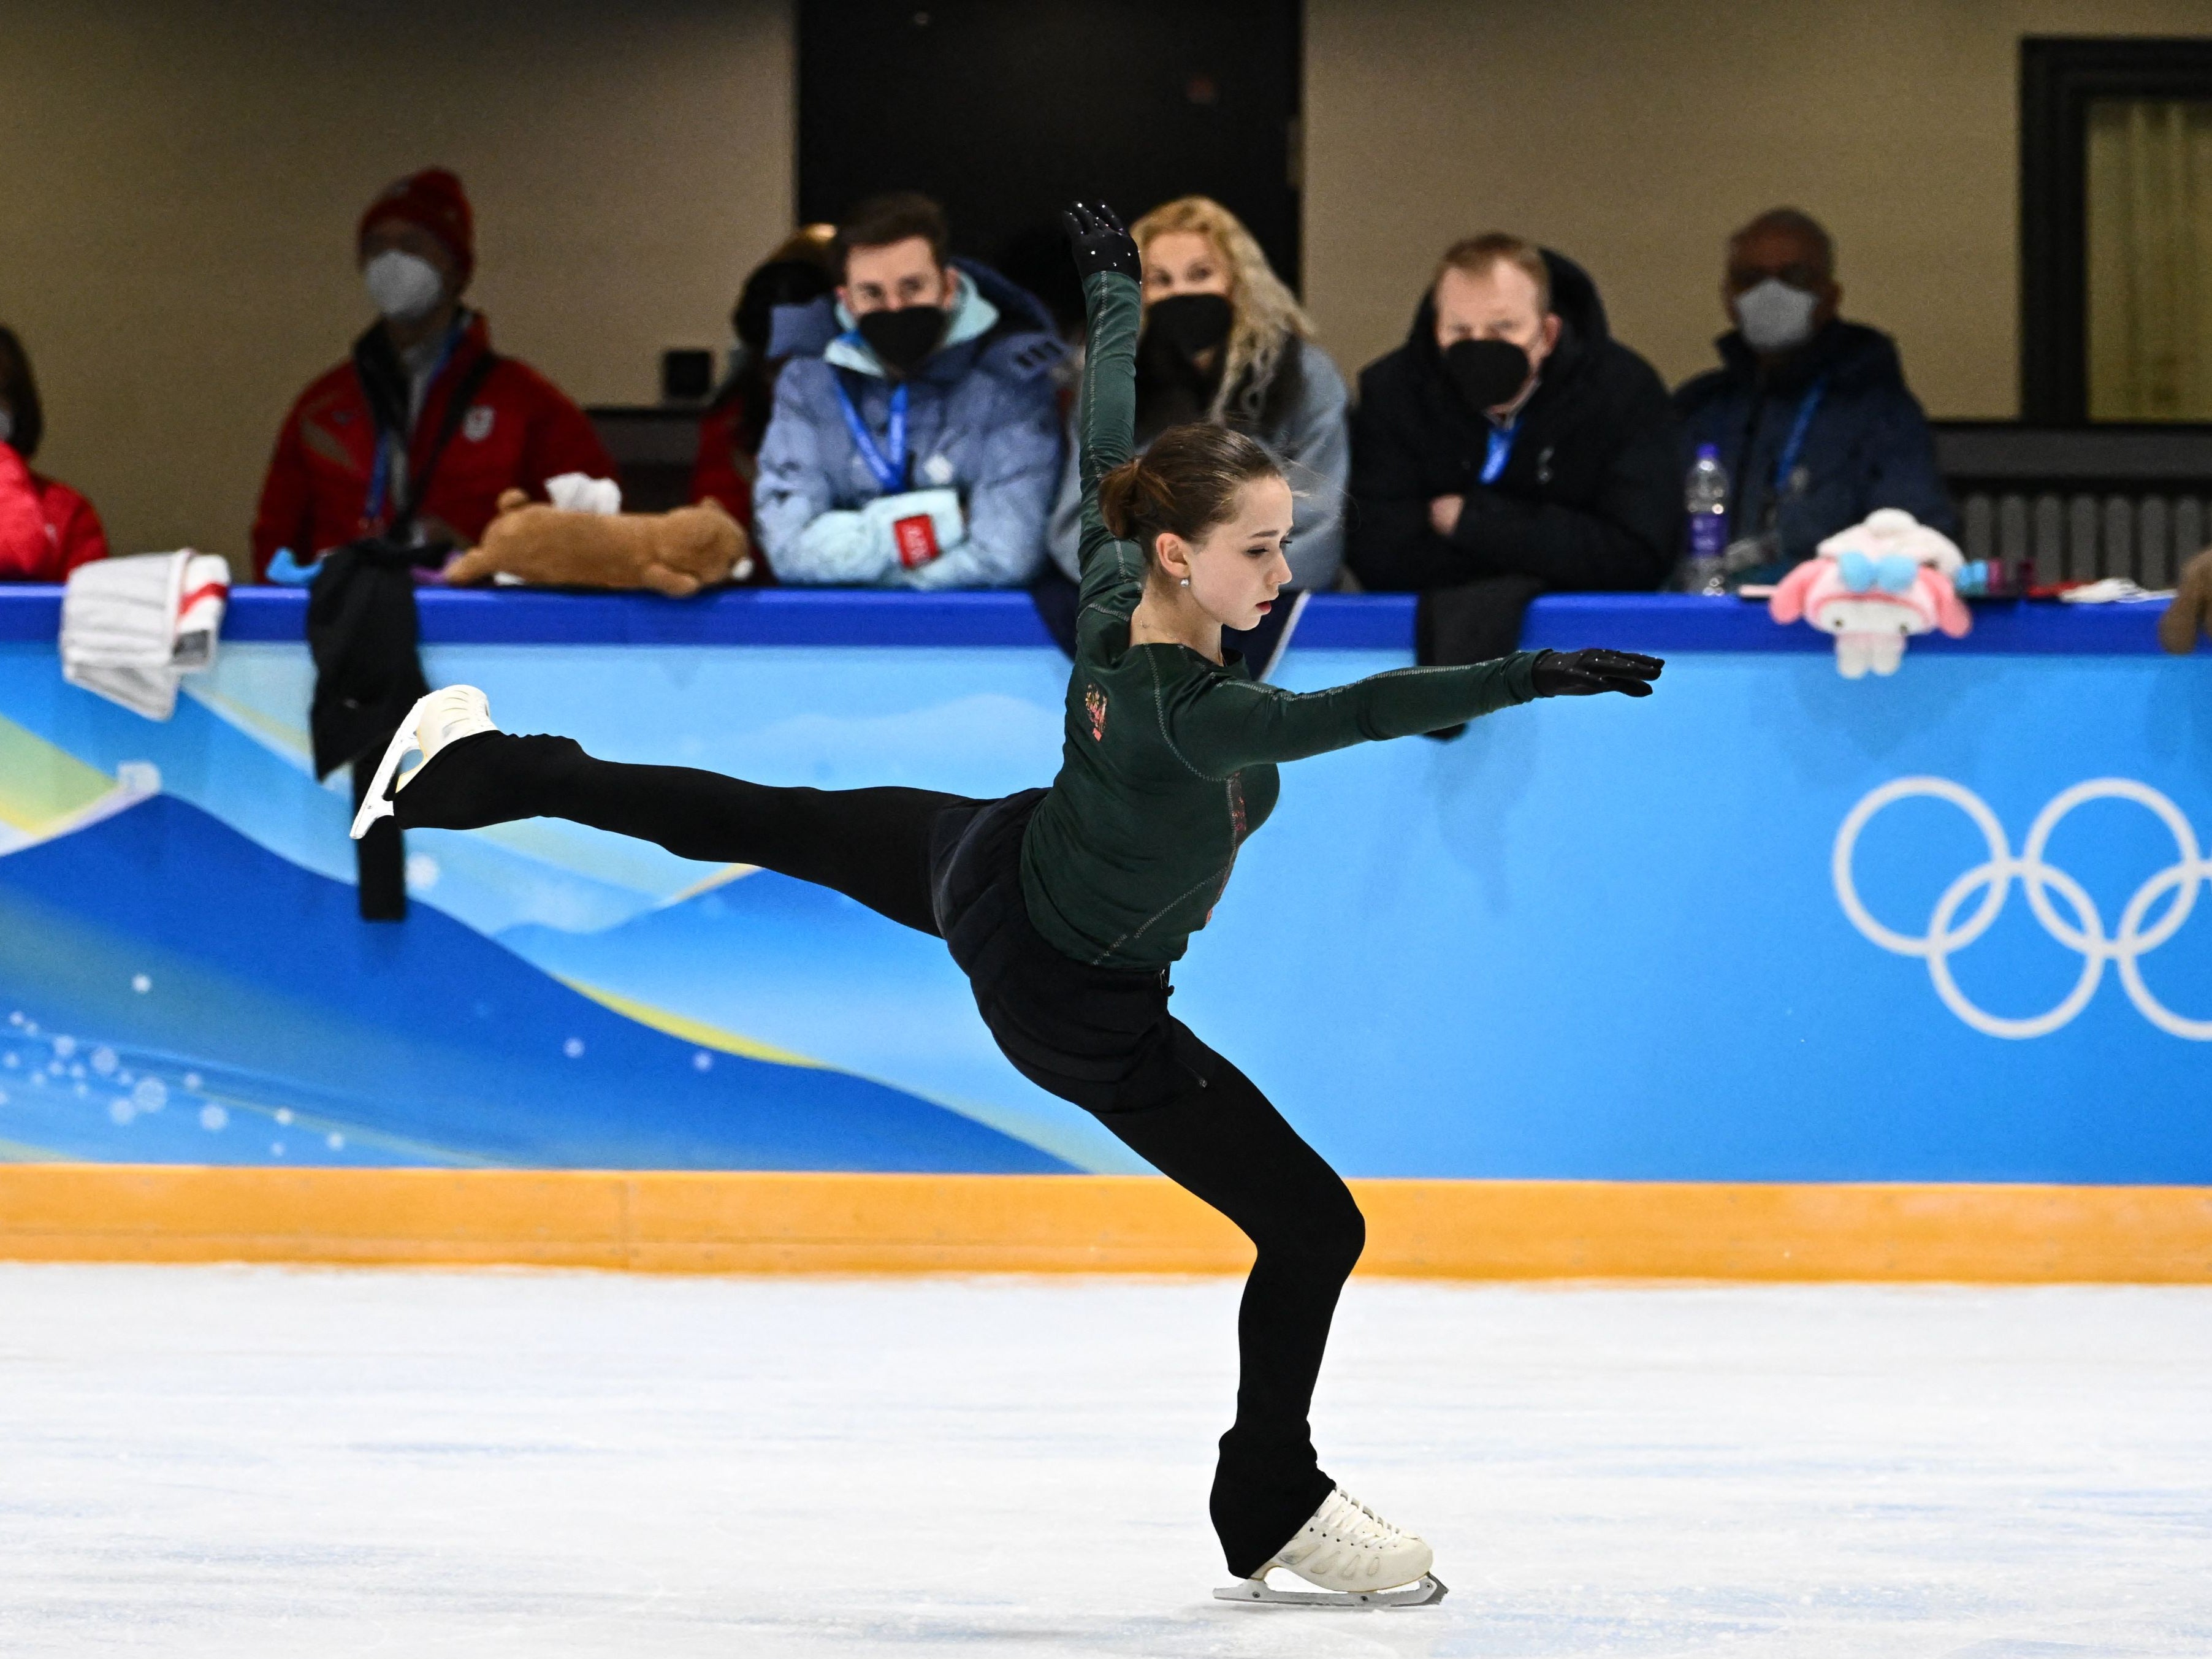 Kamila Valieva trains on Monday after being cleared to compete